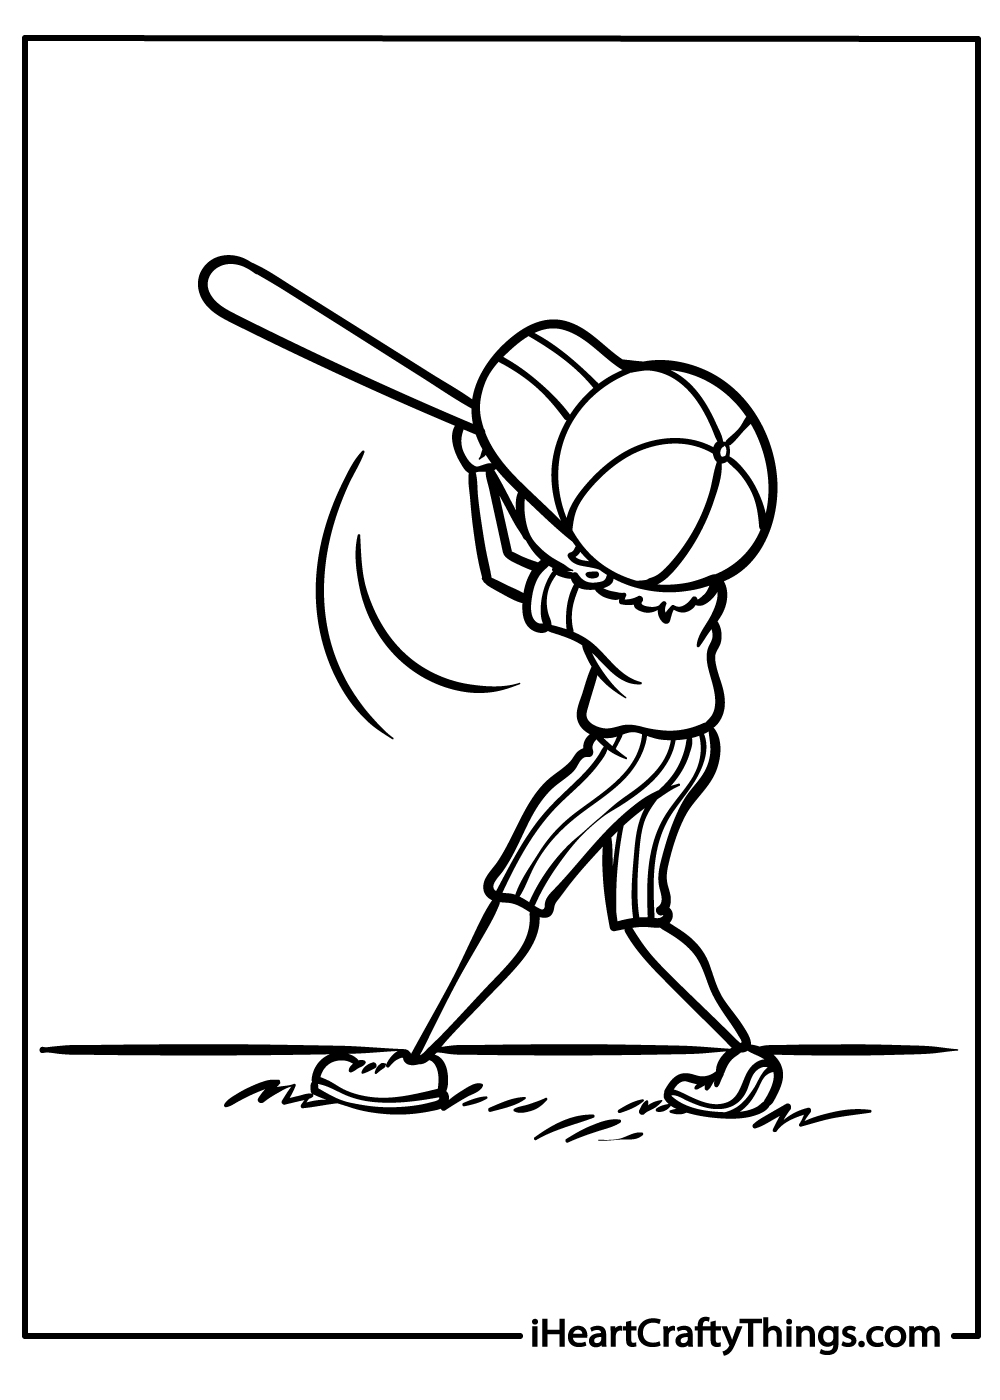 boy plays baseball coloring pages